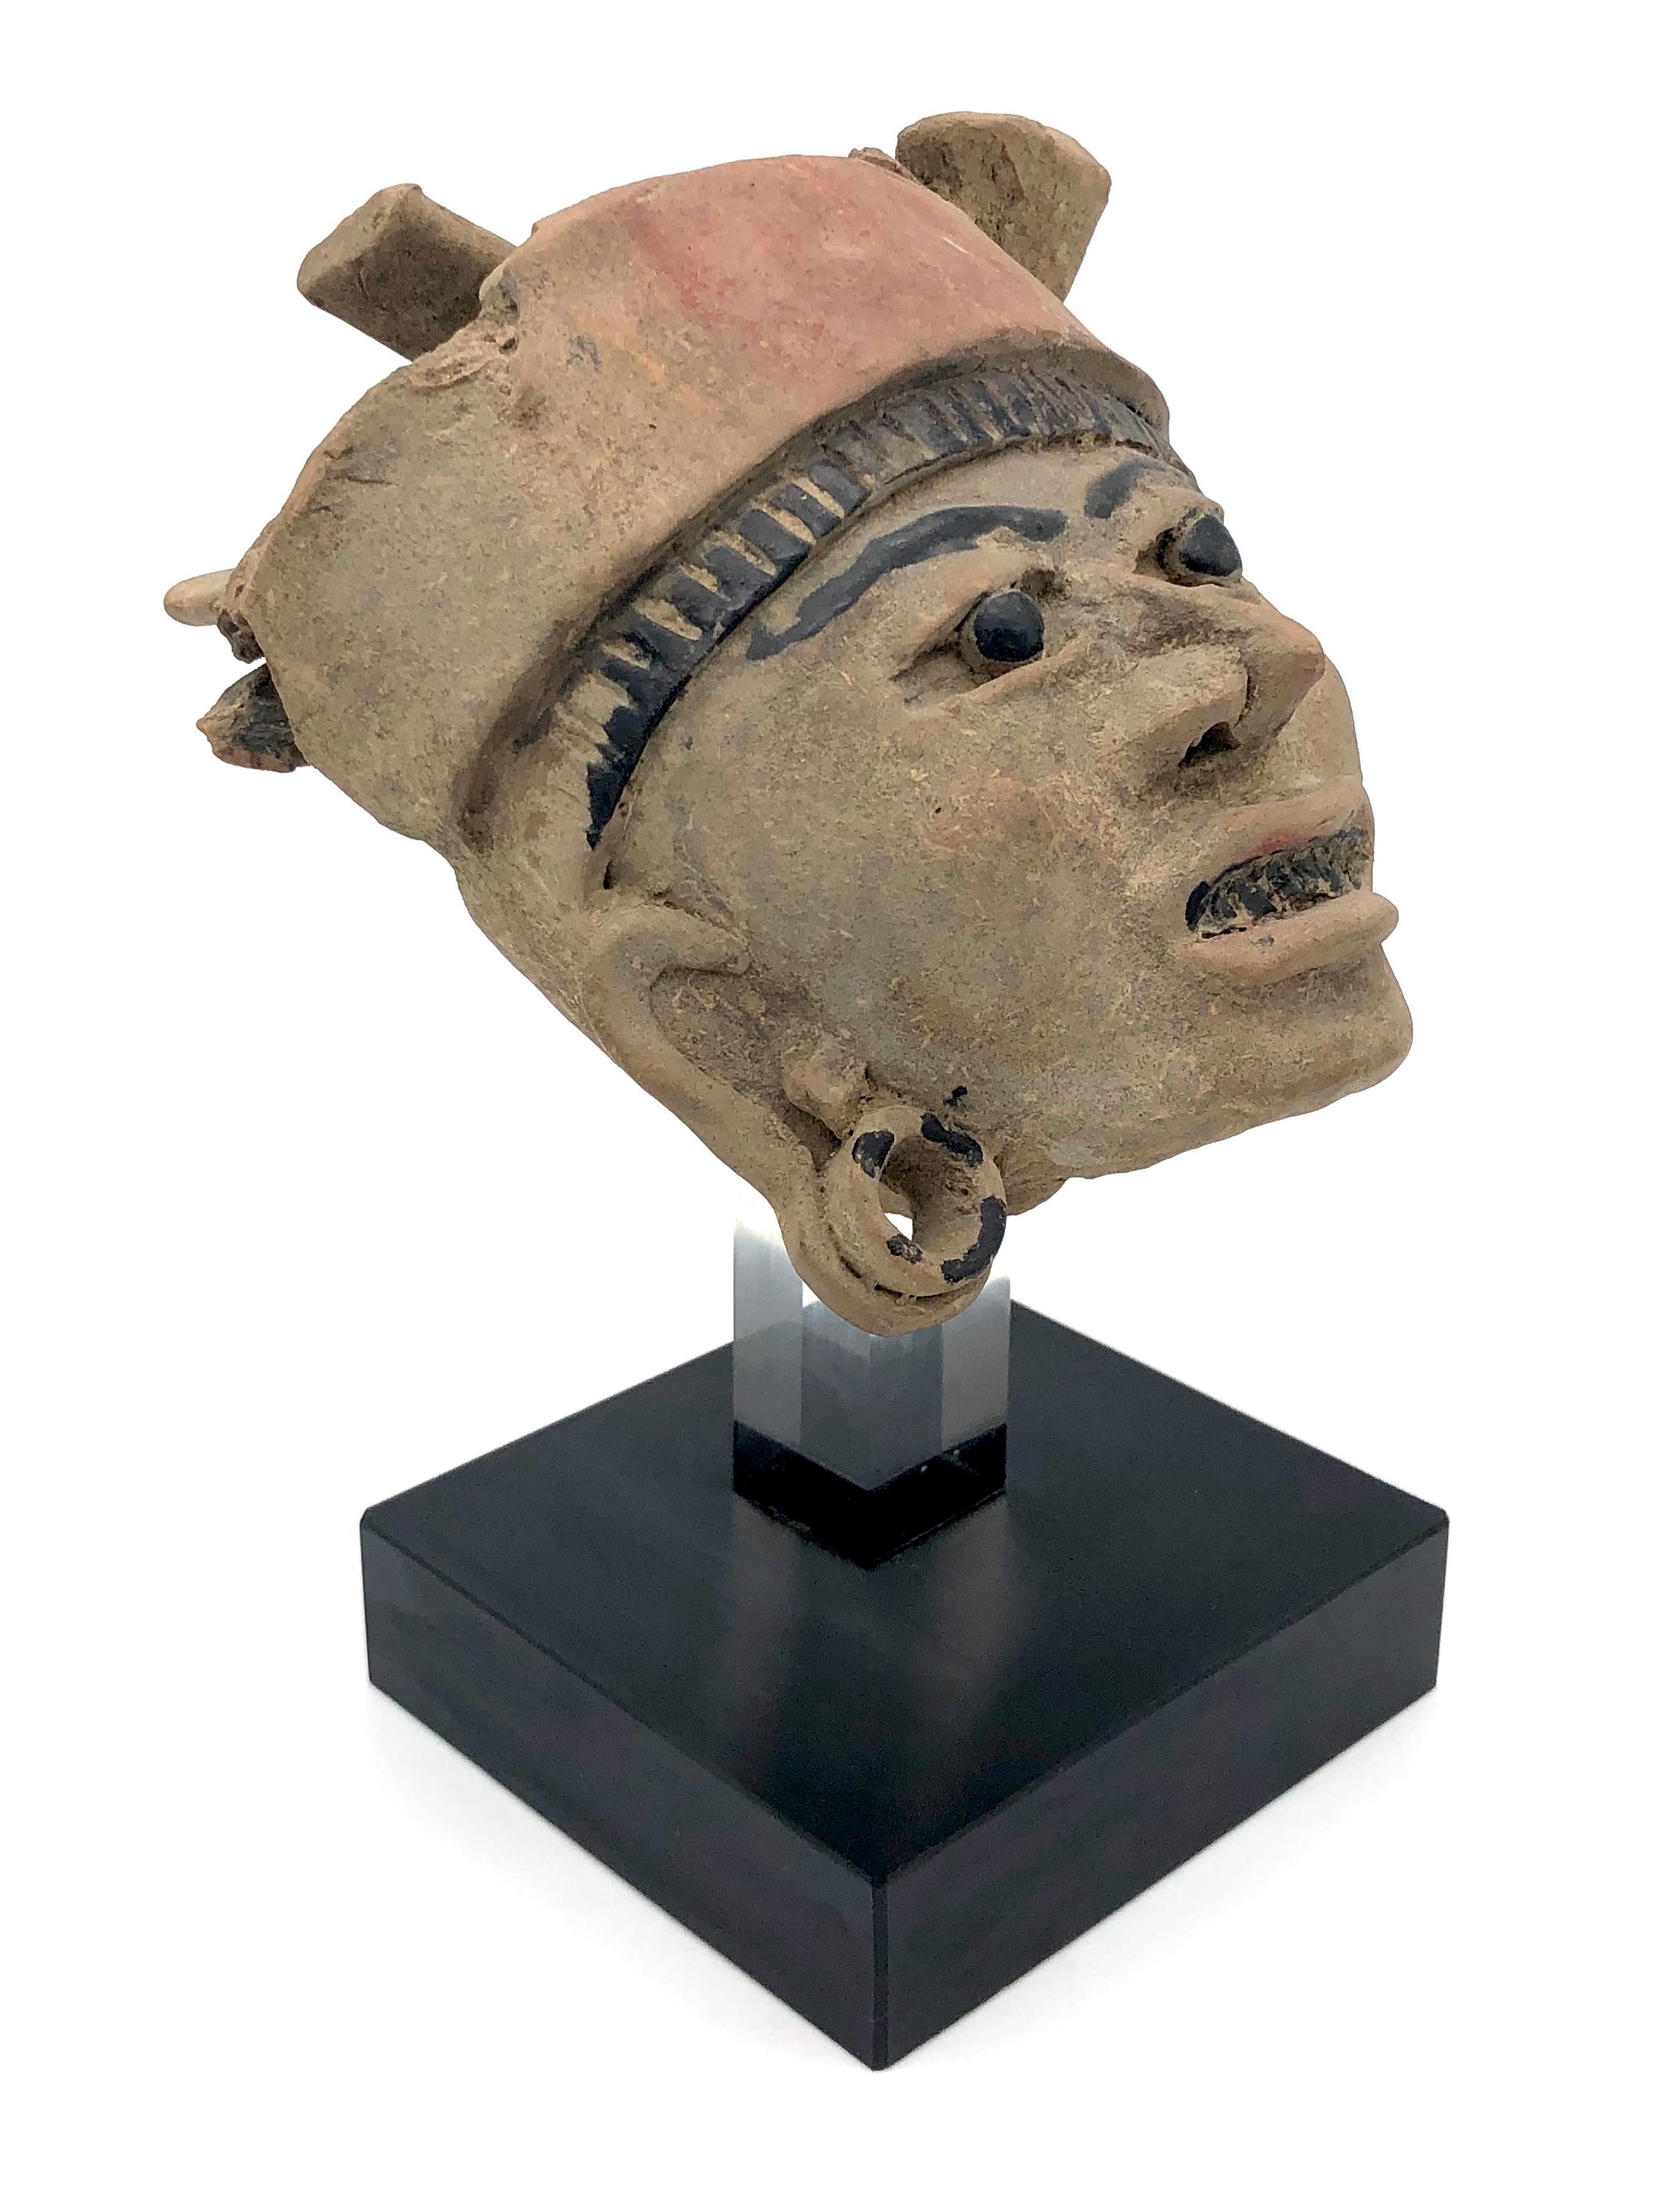 This expressive sculpture of the head of a warrior is made of terracotta painted with black colour.
It dates from the Remojadas Culture on Mexico's Veracruz costal region.

The height of the head without the stand meassures 16cm.